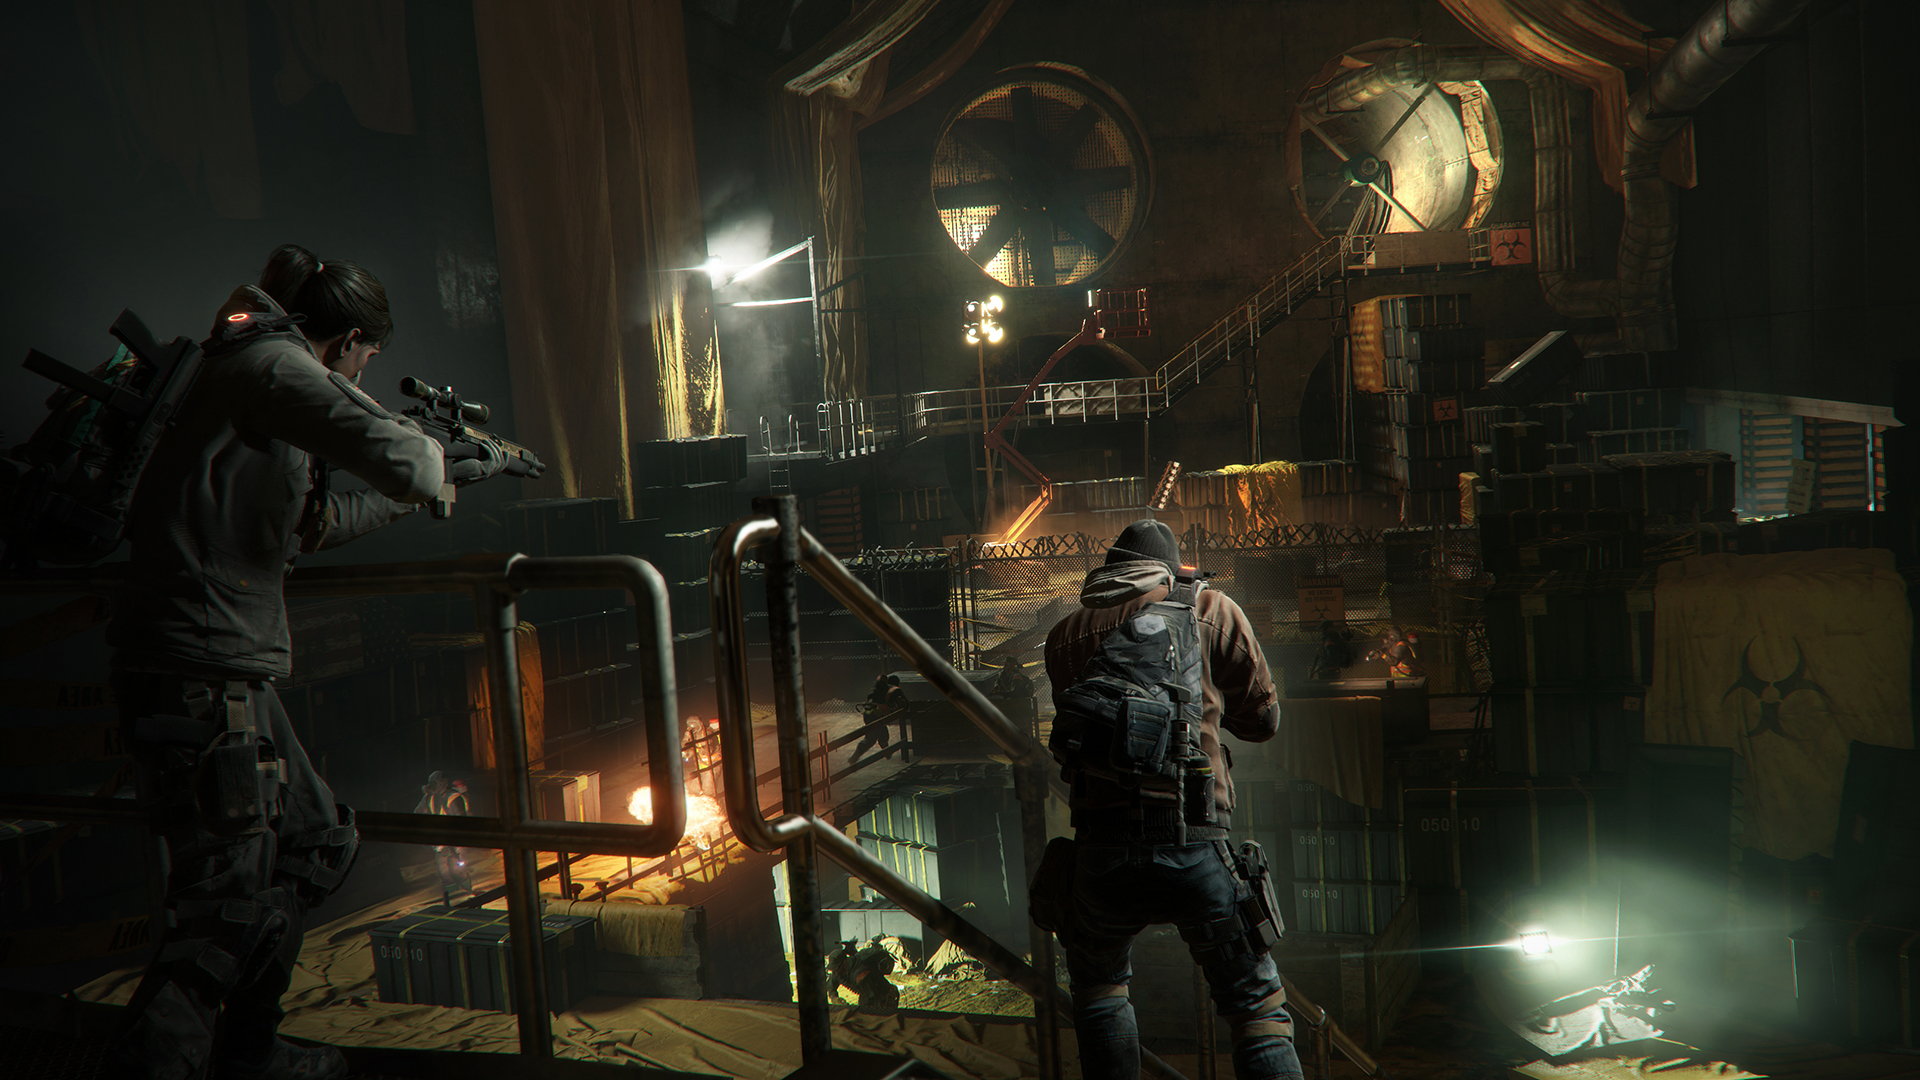 Tom Clancy S The Division Image - Lighting Effects In Games - HD Wallpaper 